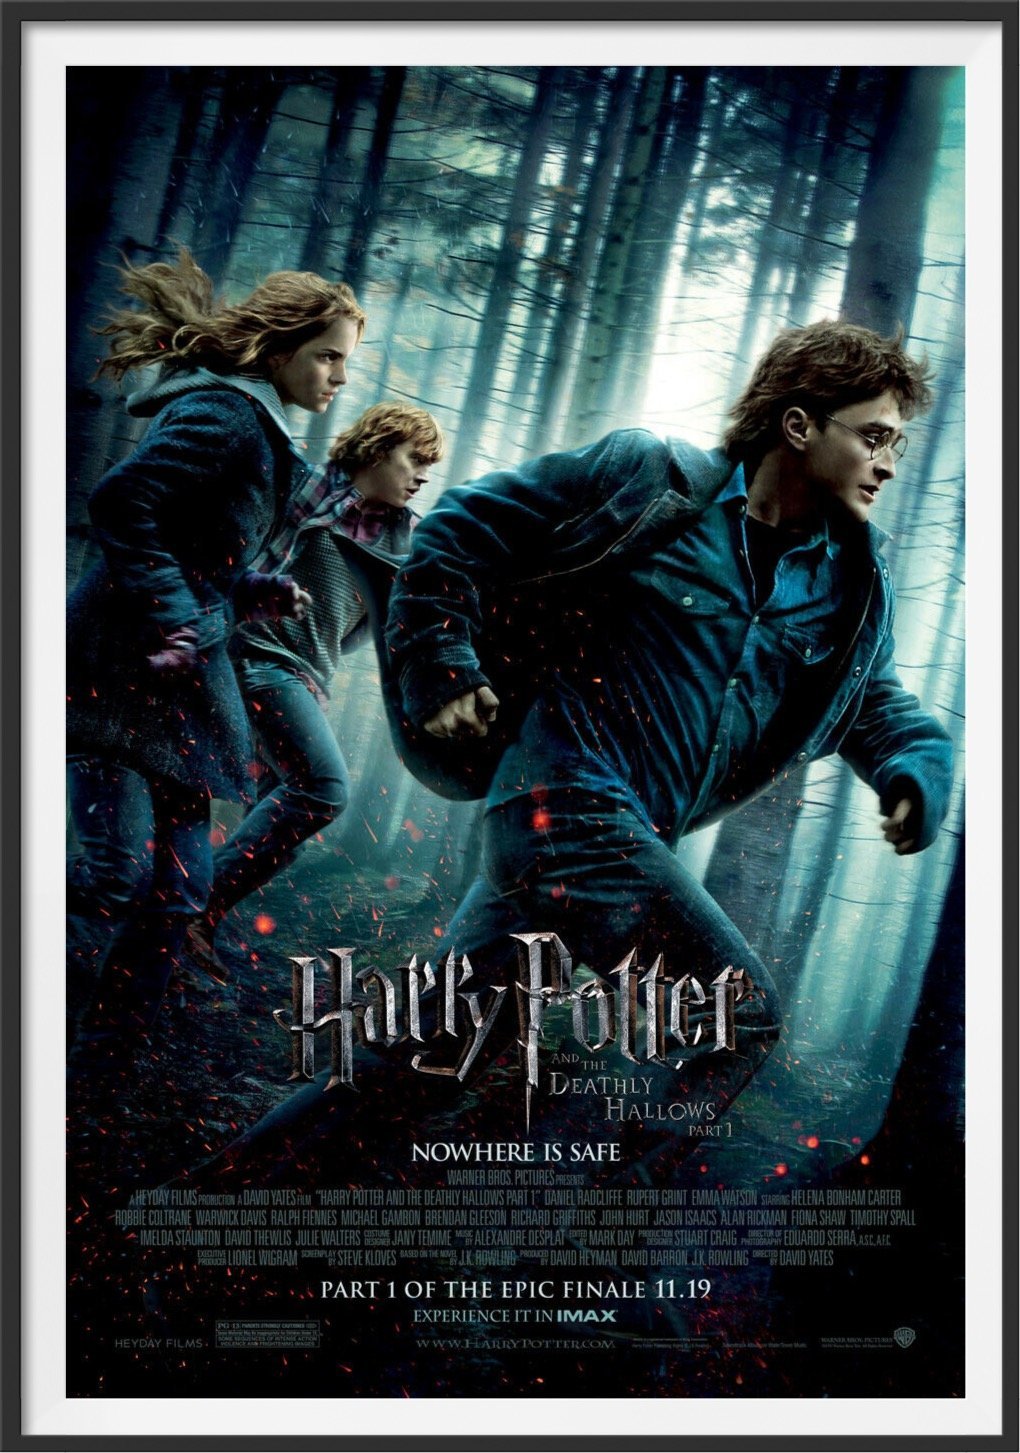 Harry Potter and the Deathly Hallows - 2010 - Original Movie